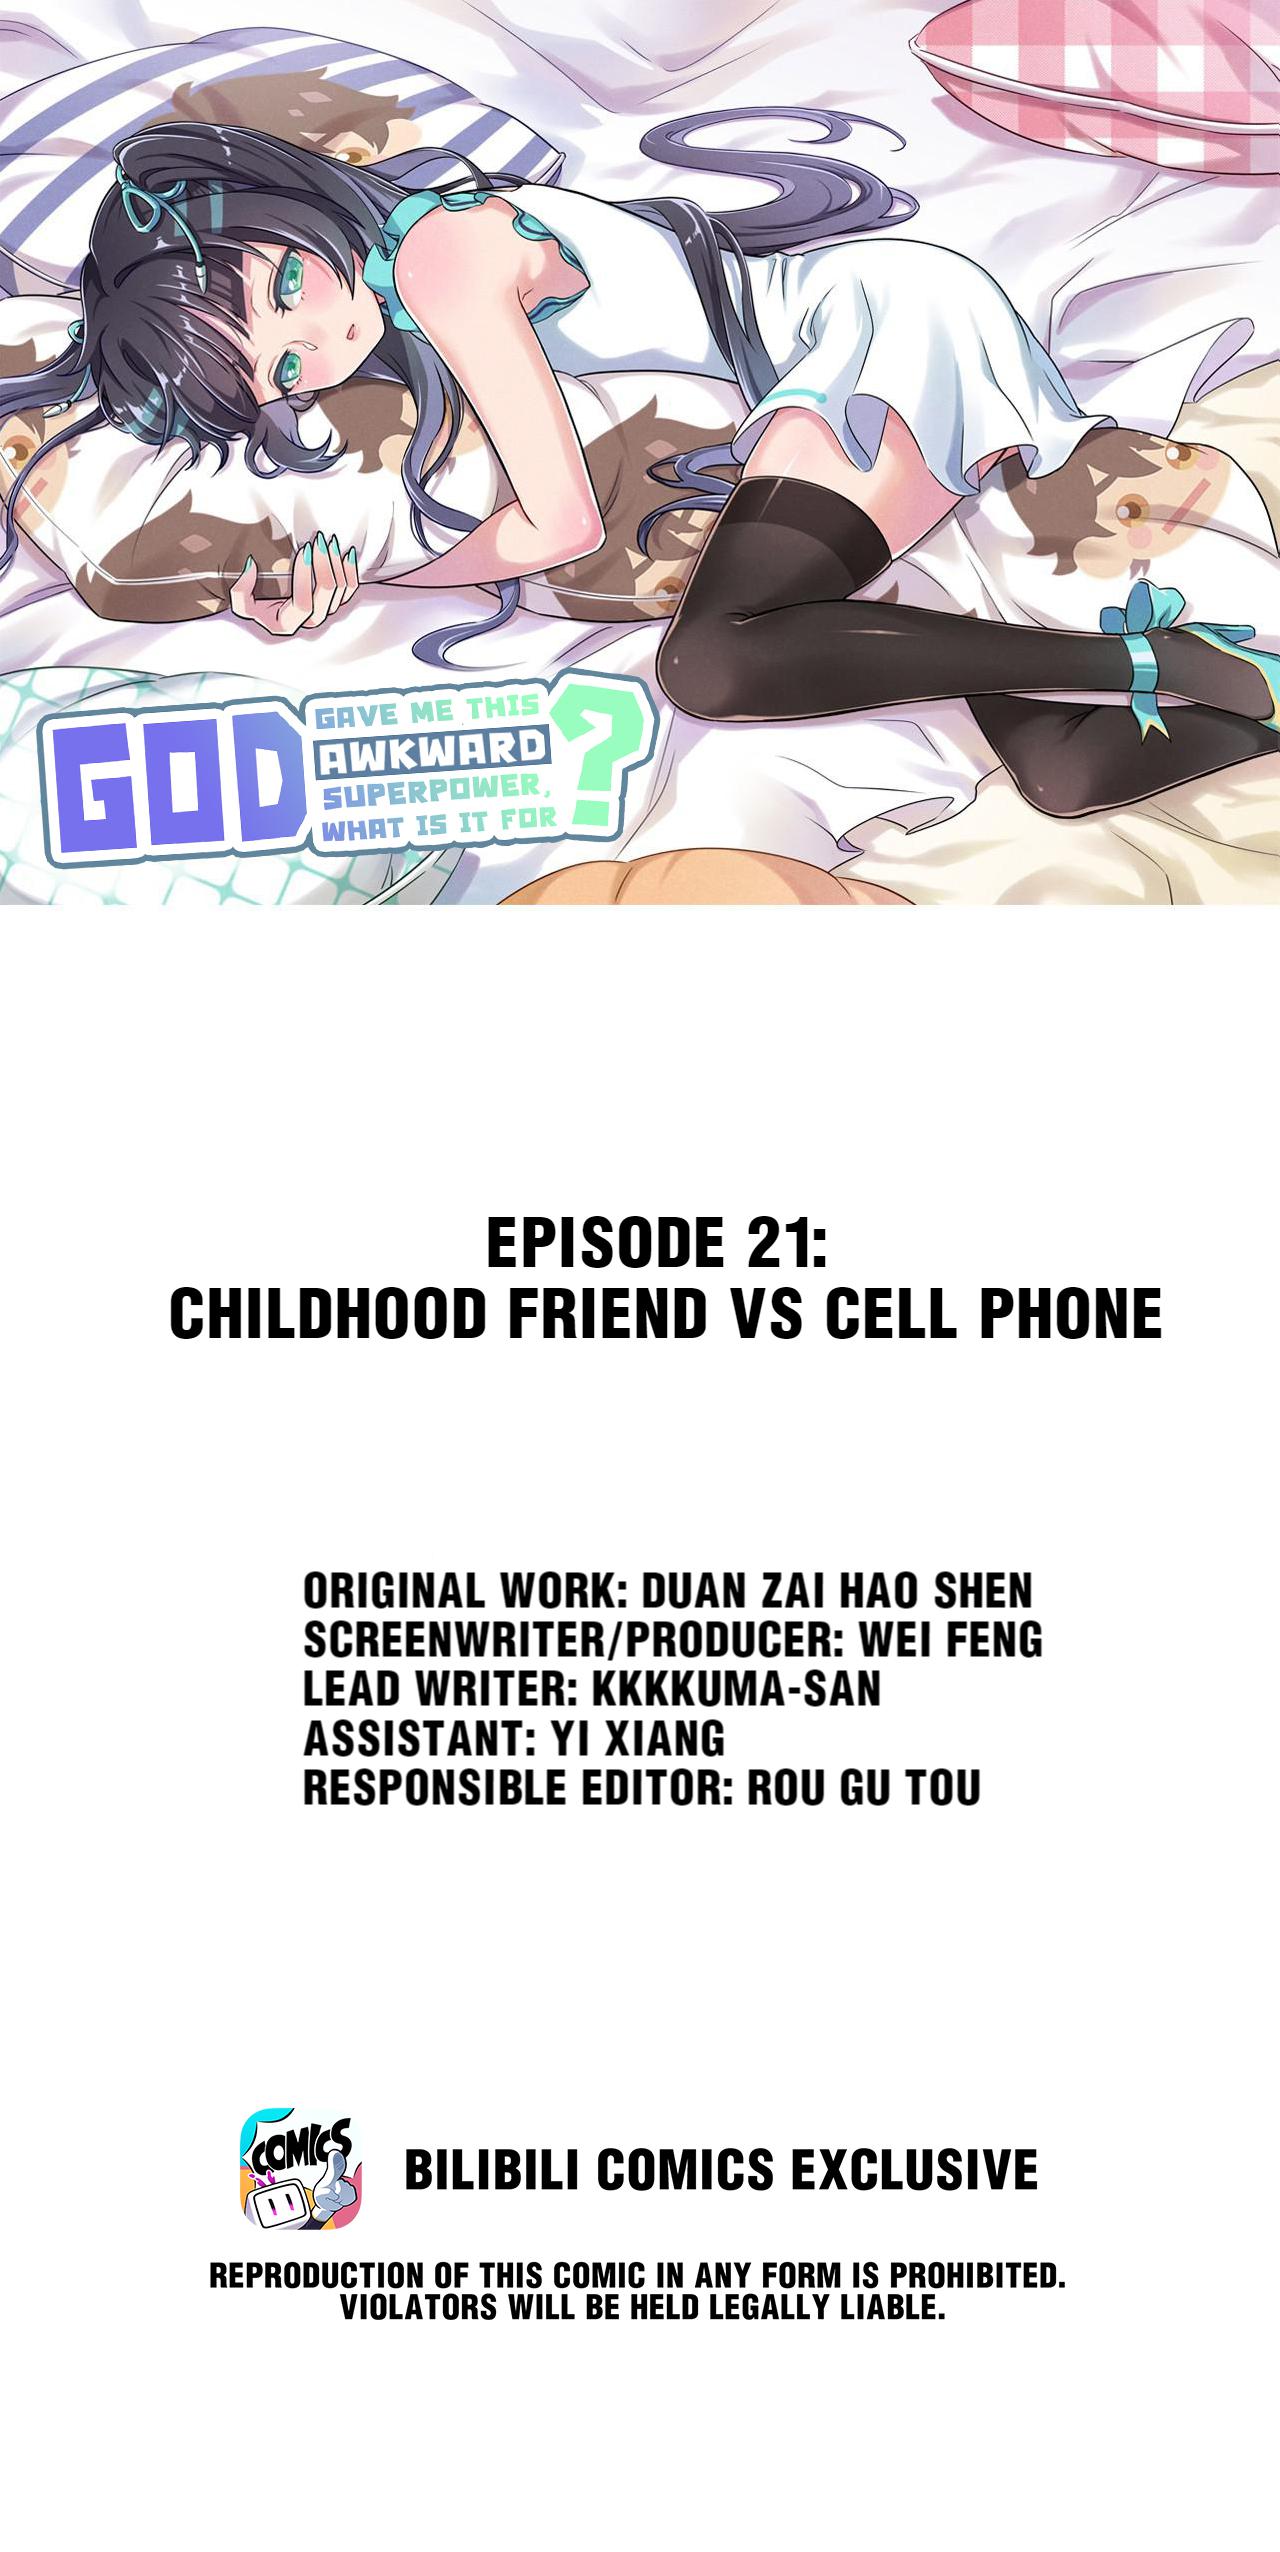 God Gave Me This Awkward Superpower, What Is It for? 21 Childhood Friend Vs Cell Phone